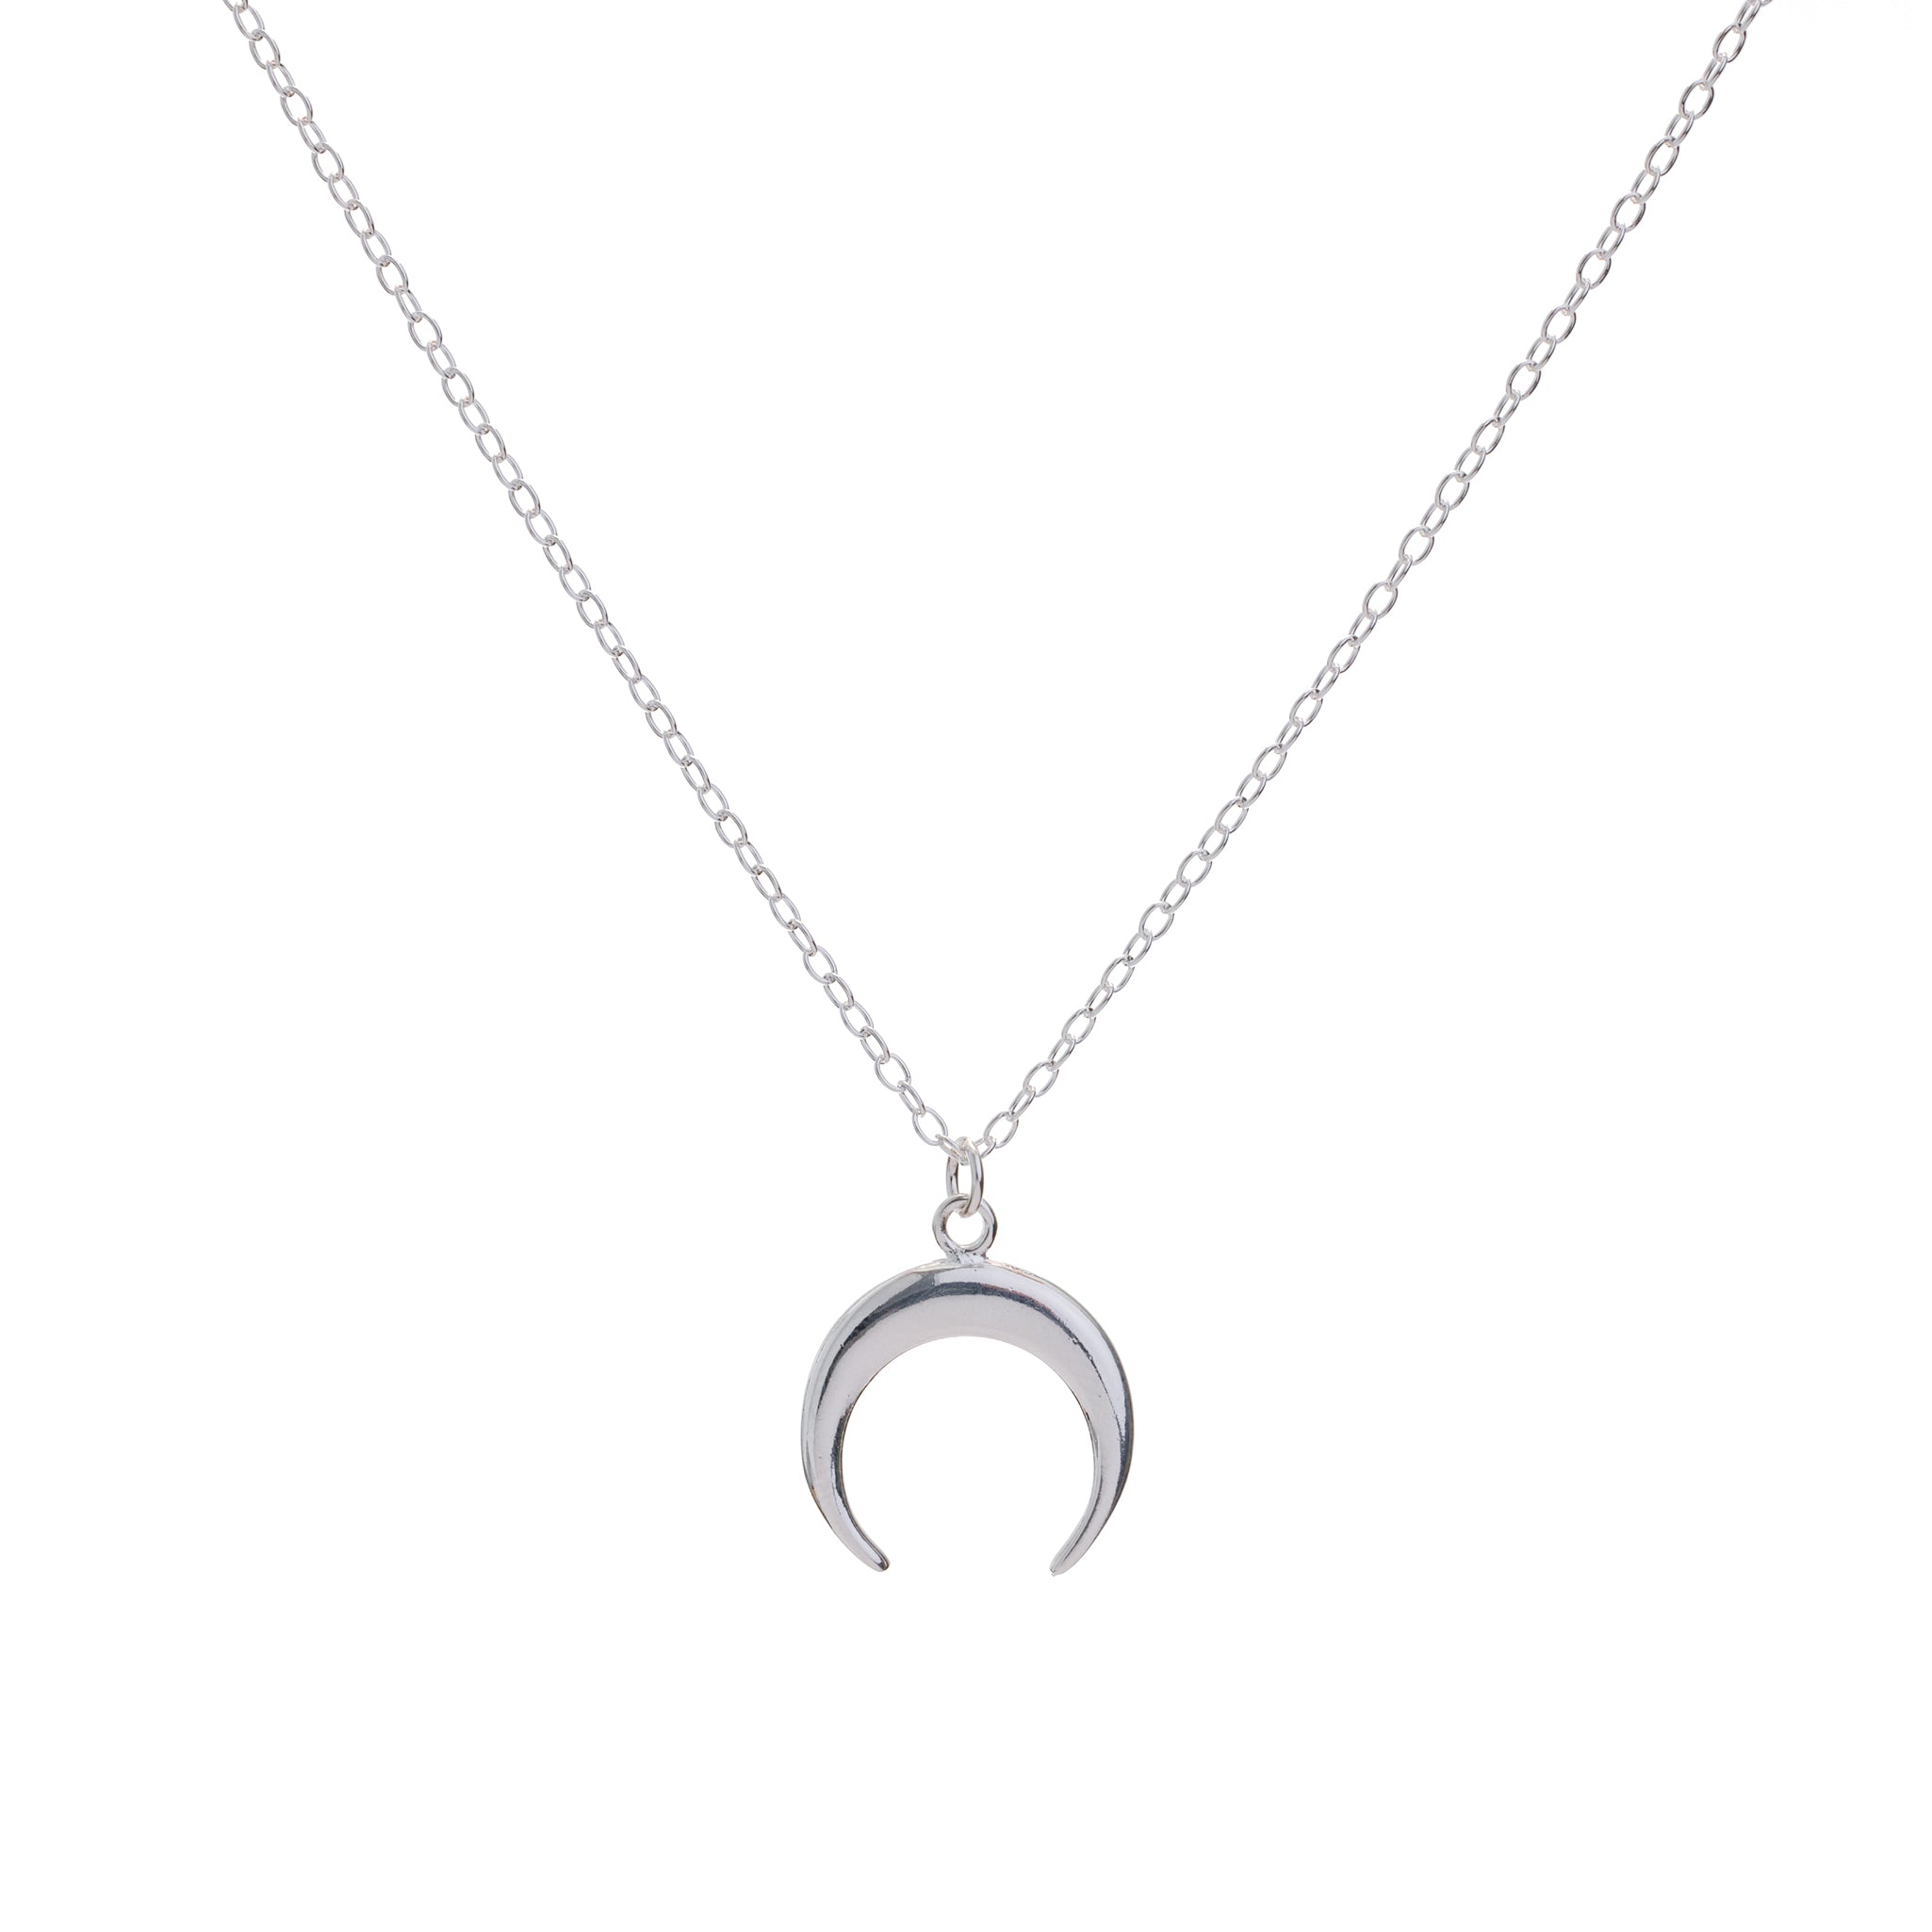 New Arrivals - Sustainable minimal jewellery | OMCH – Oh My Clumsy Heart